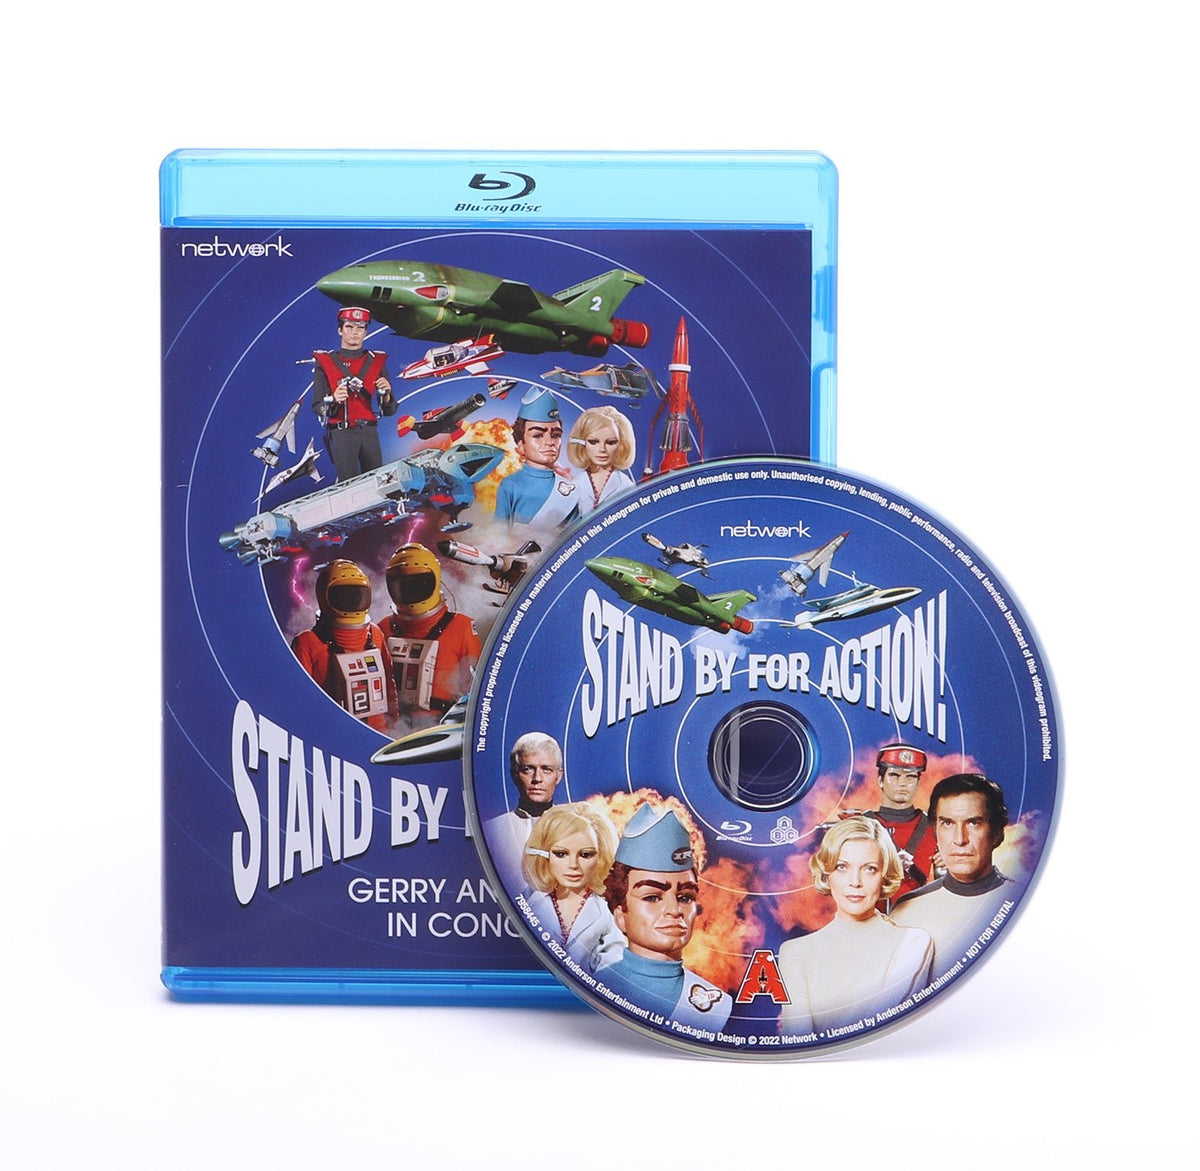 Stand by for Action! Gerry Anderson in Concert [Blu-ray or DVD] - The Gerry Anderson Store